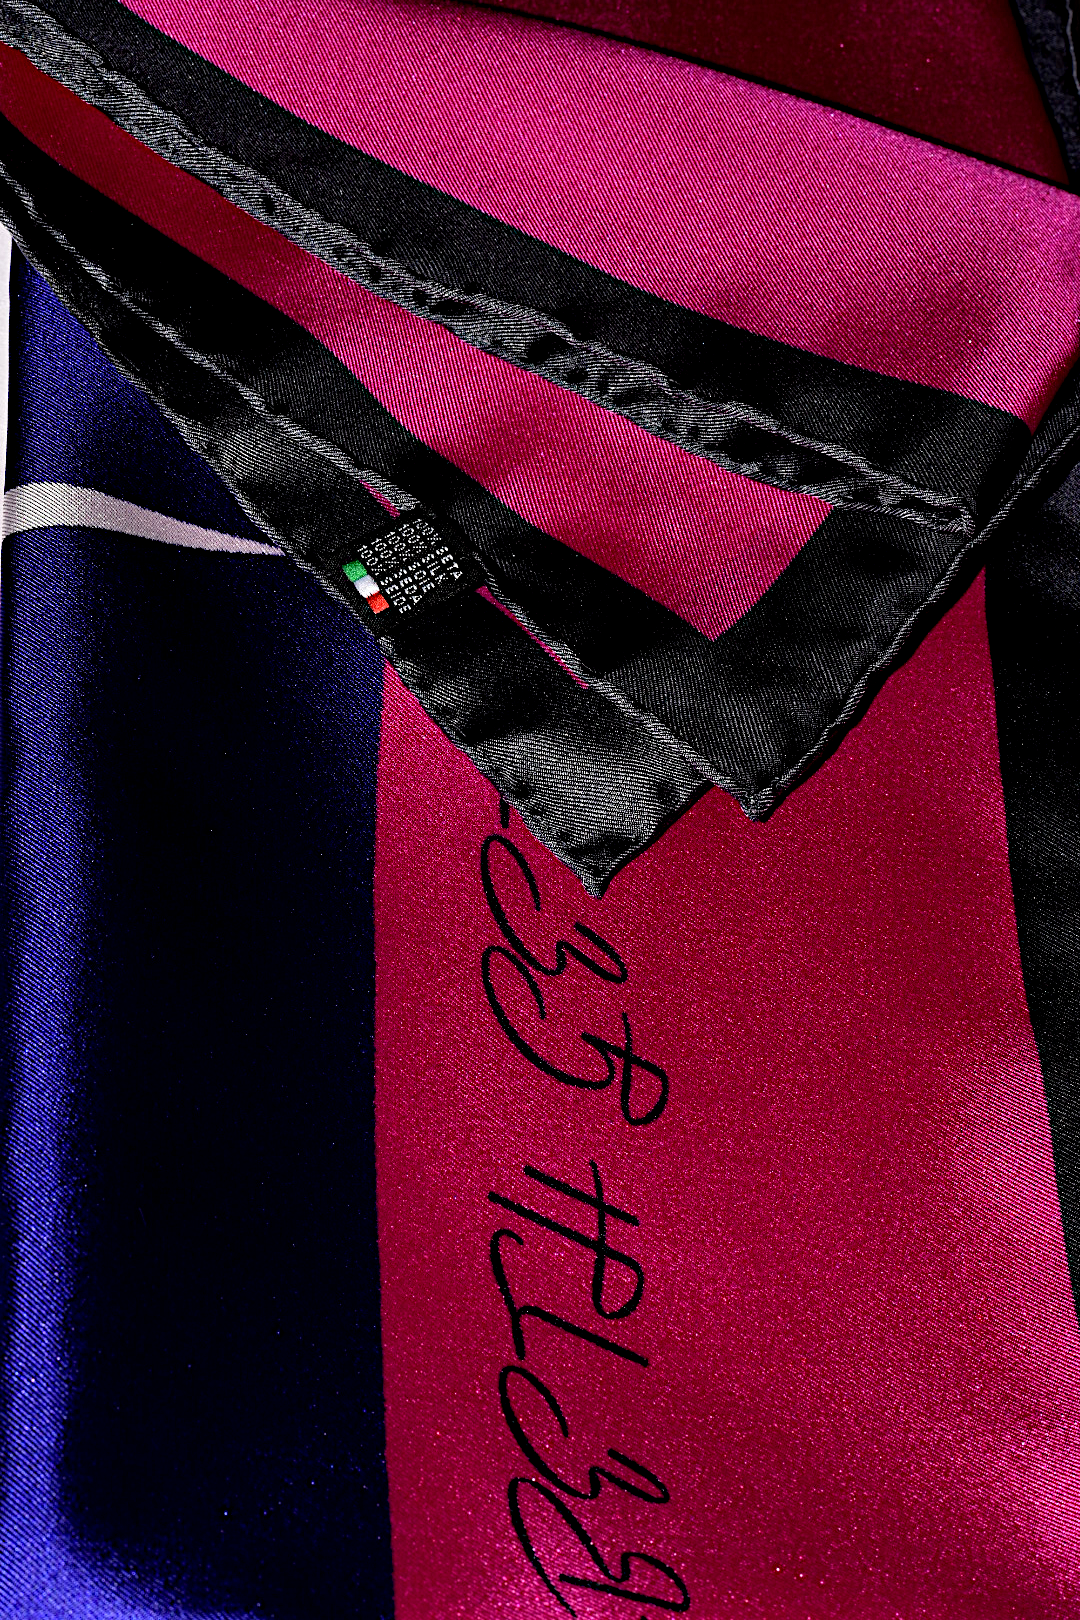 Red-billed Hornbill Ma Belle Silk Twill Scarf Pink/Navy Blue Large Square 75